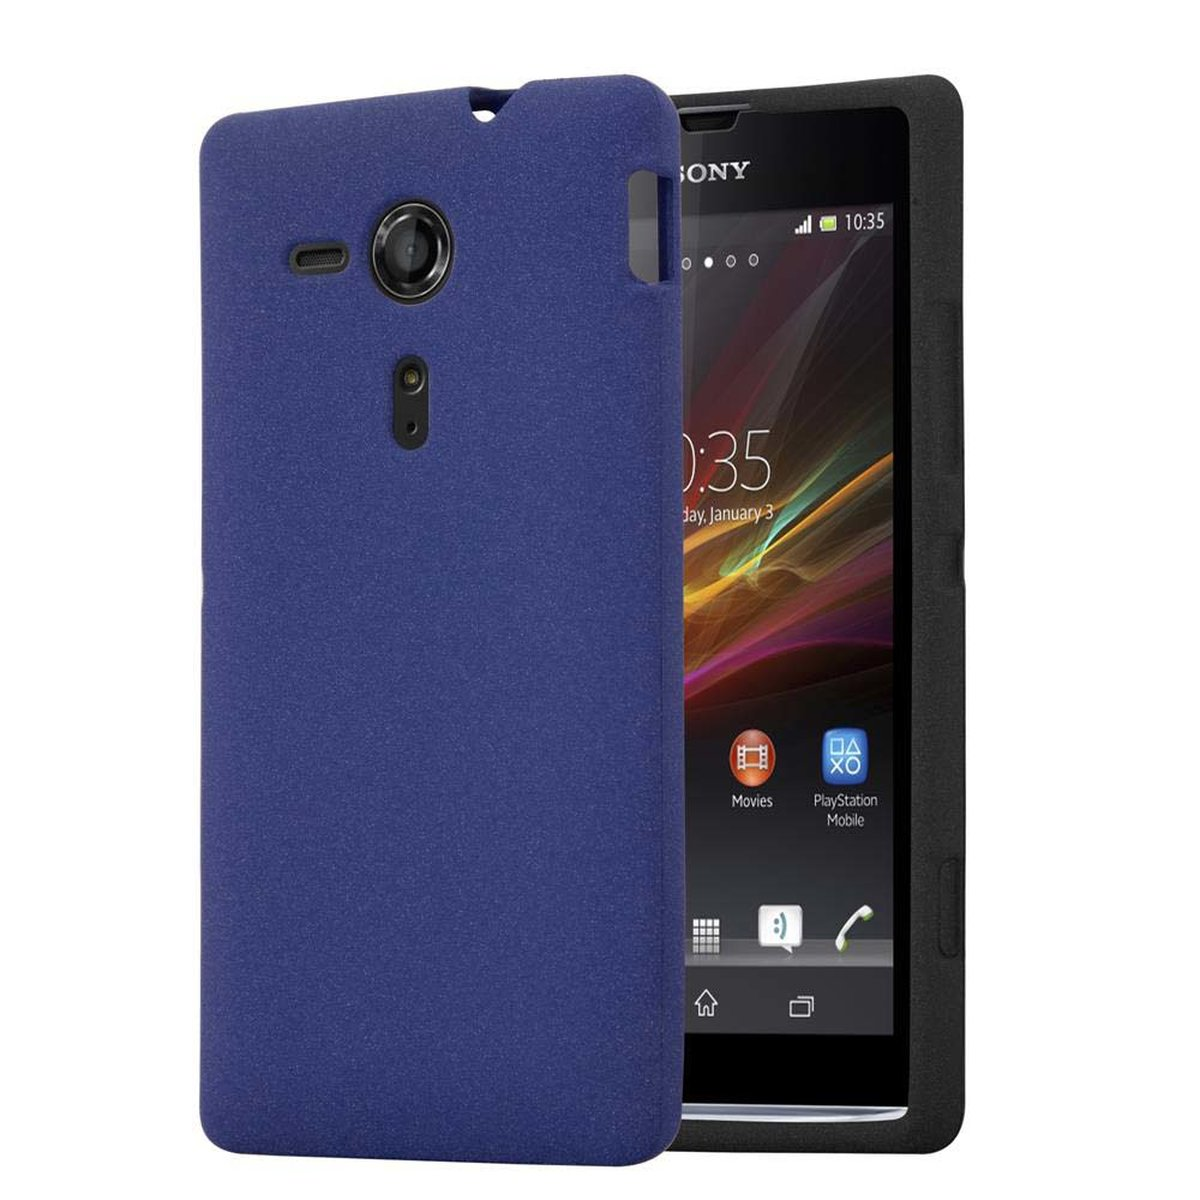 Schutzhülle, CADORABO Sony, SP, Frosted Backcover, TPU FROST BLAU DUNKEL Xperia